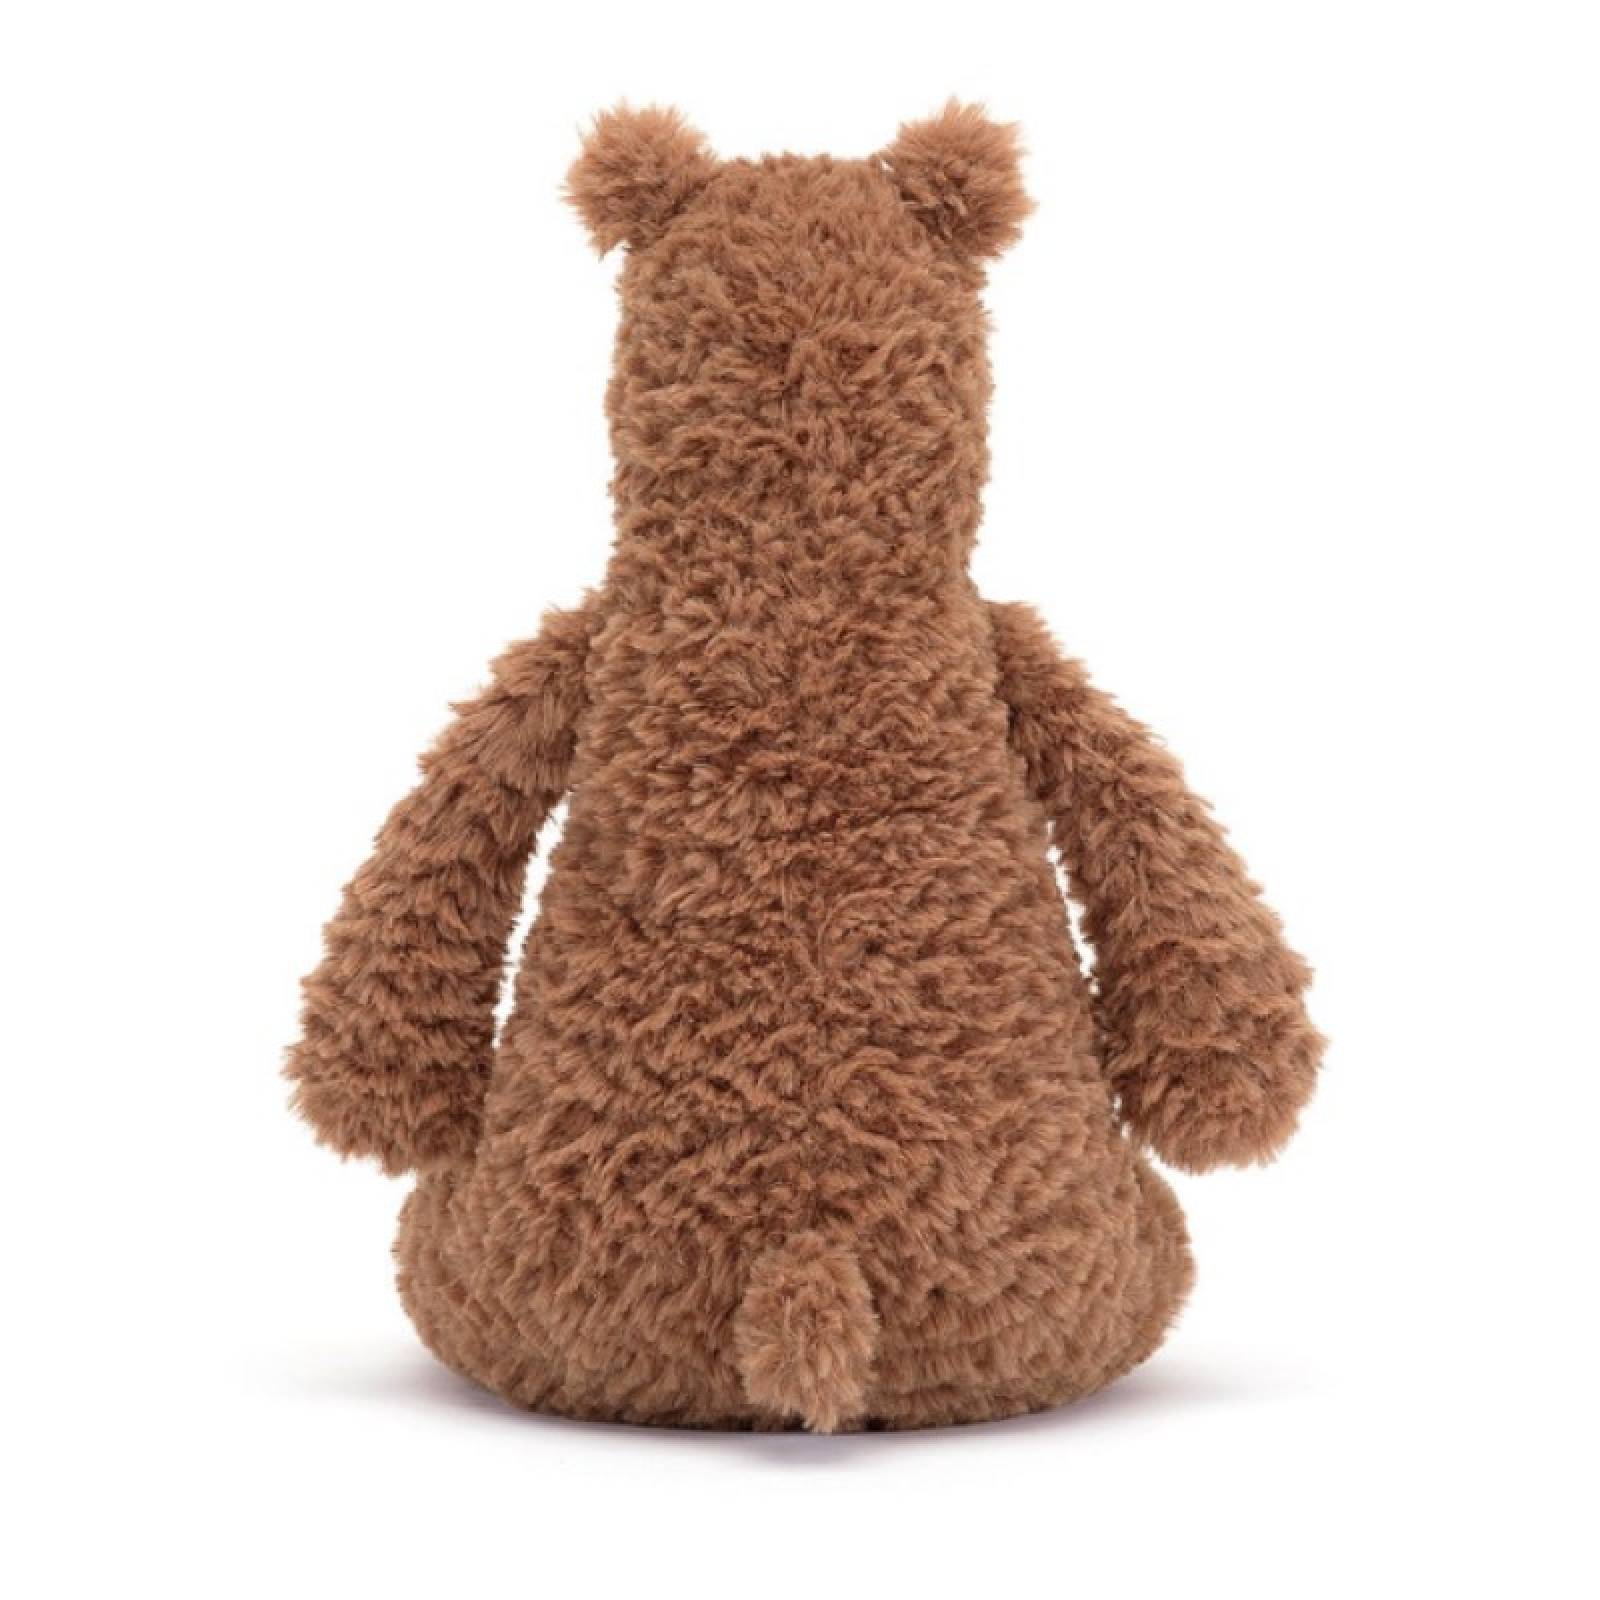 Enzo Bear Soft Toy By Jellycat 0+ thumbnails